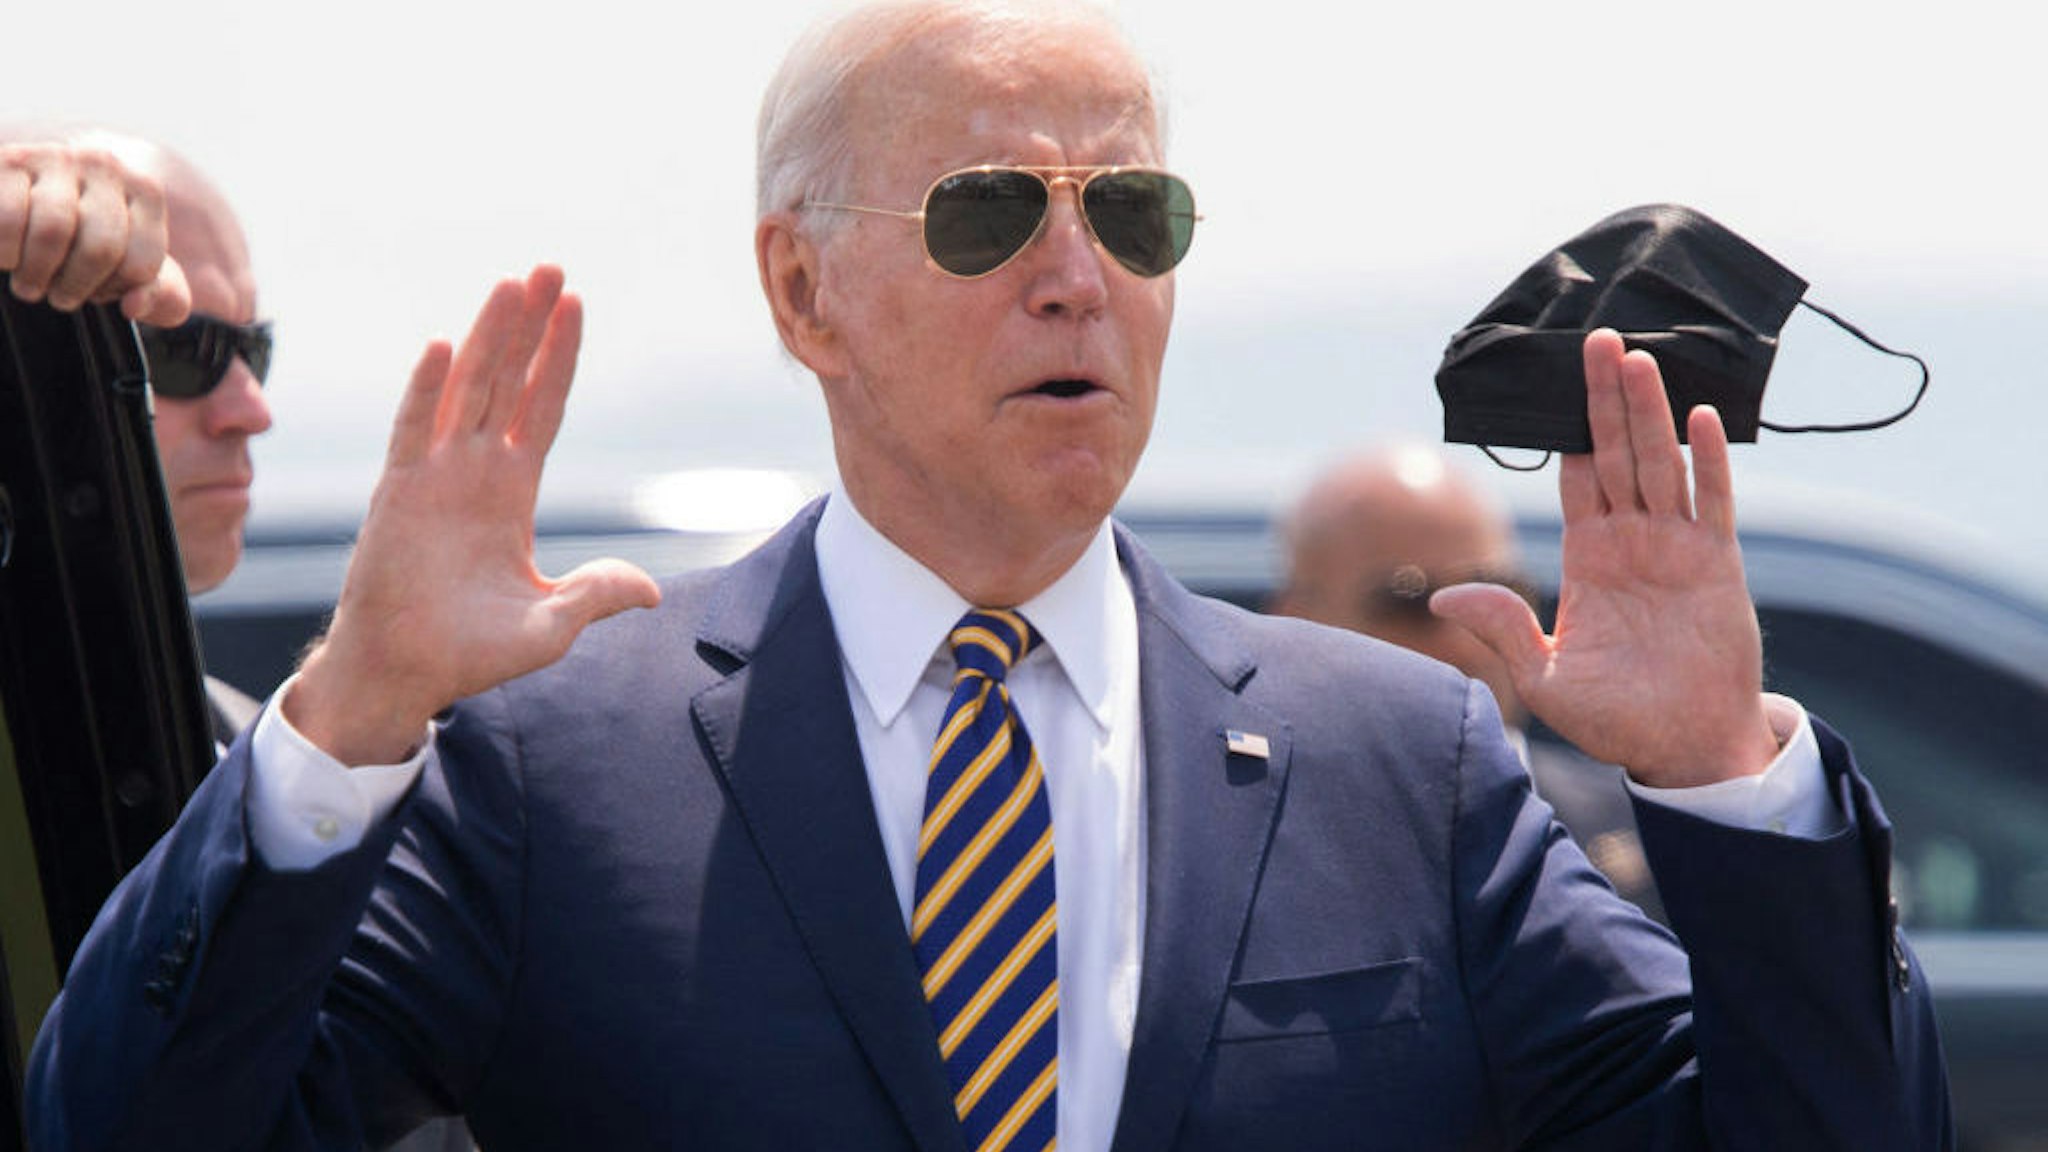 US President Joe Biden answers a question from the press as he holds a mask upon arrival on Air Force One at Lehigh Valley International Airport in Allentown, Pennsylvania, July 28, 2021, as he travels to speak on the economy. (Photo by SAUL LOEB / AFP) (Photo by SAUL LOEB/AFP via Getty Images)